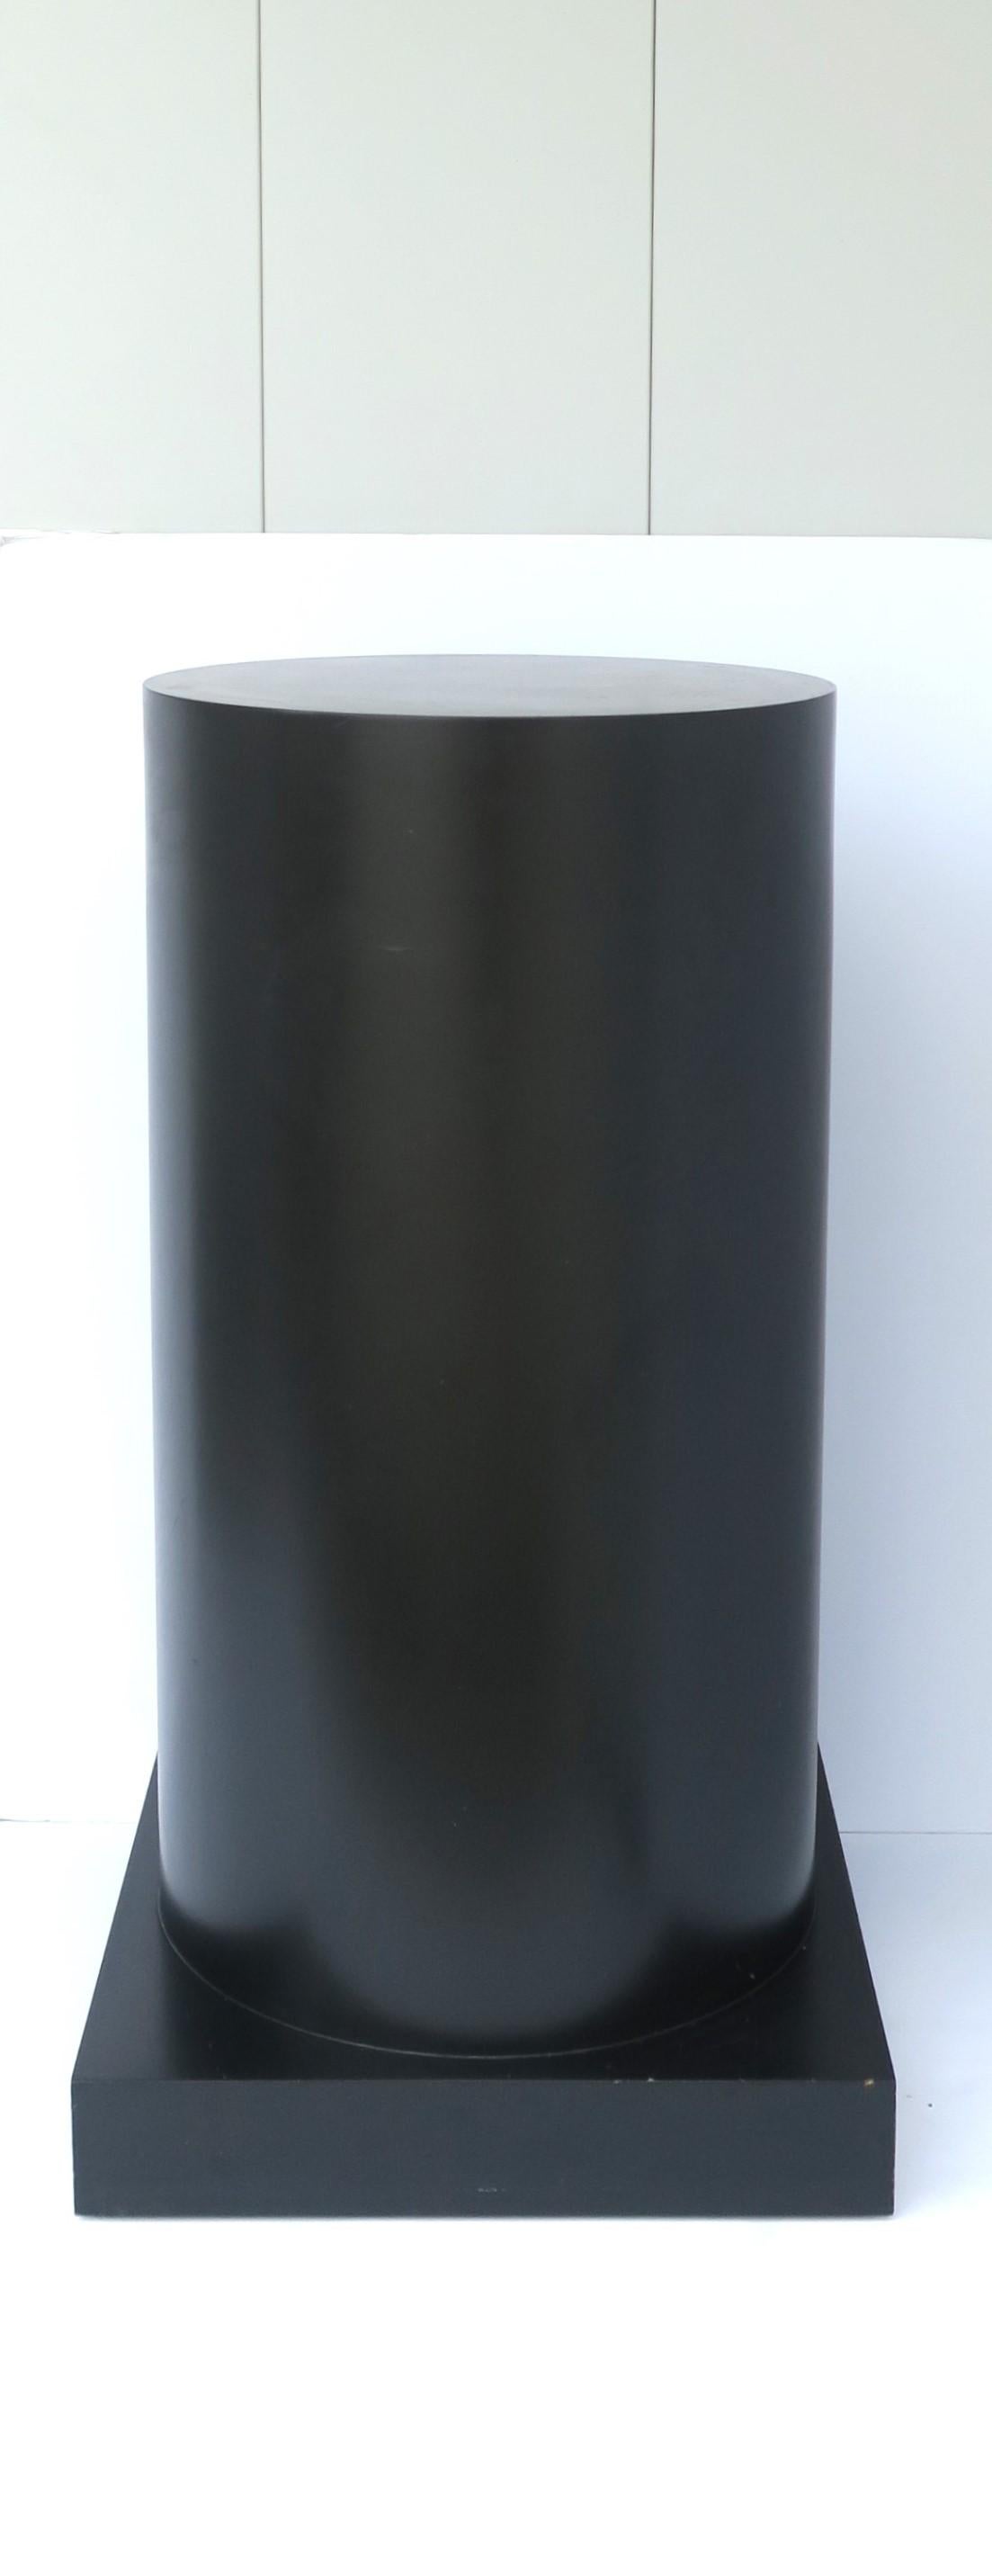 A relatively large black cylindrical pedestal column stand with square base, in the modern style or Post-Modern period, circa late-20th century, 1980s. A great piece to hold/display sculpture, plant, etc. Piece is a nice size. Dimensions: Square